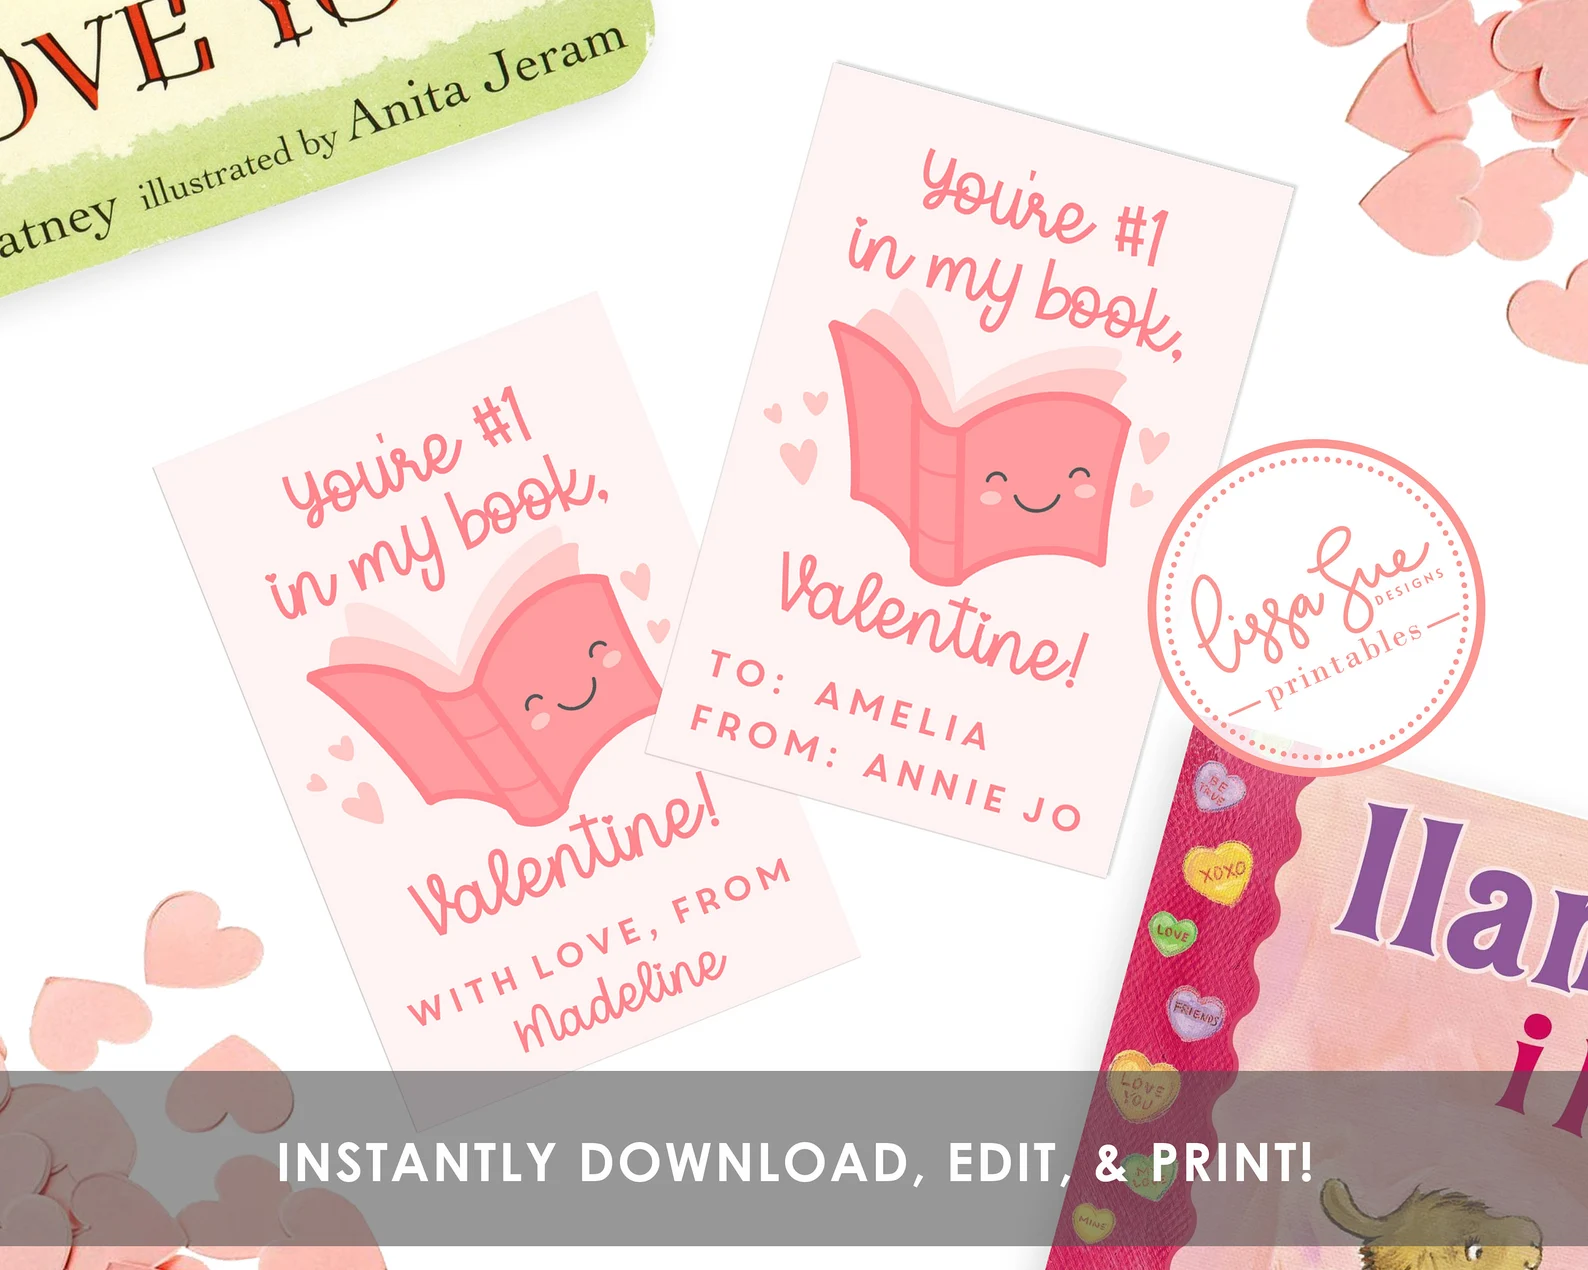 Pink valentines with an illustration of a smiling book that reads "You're number one in my book"